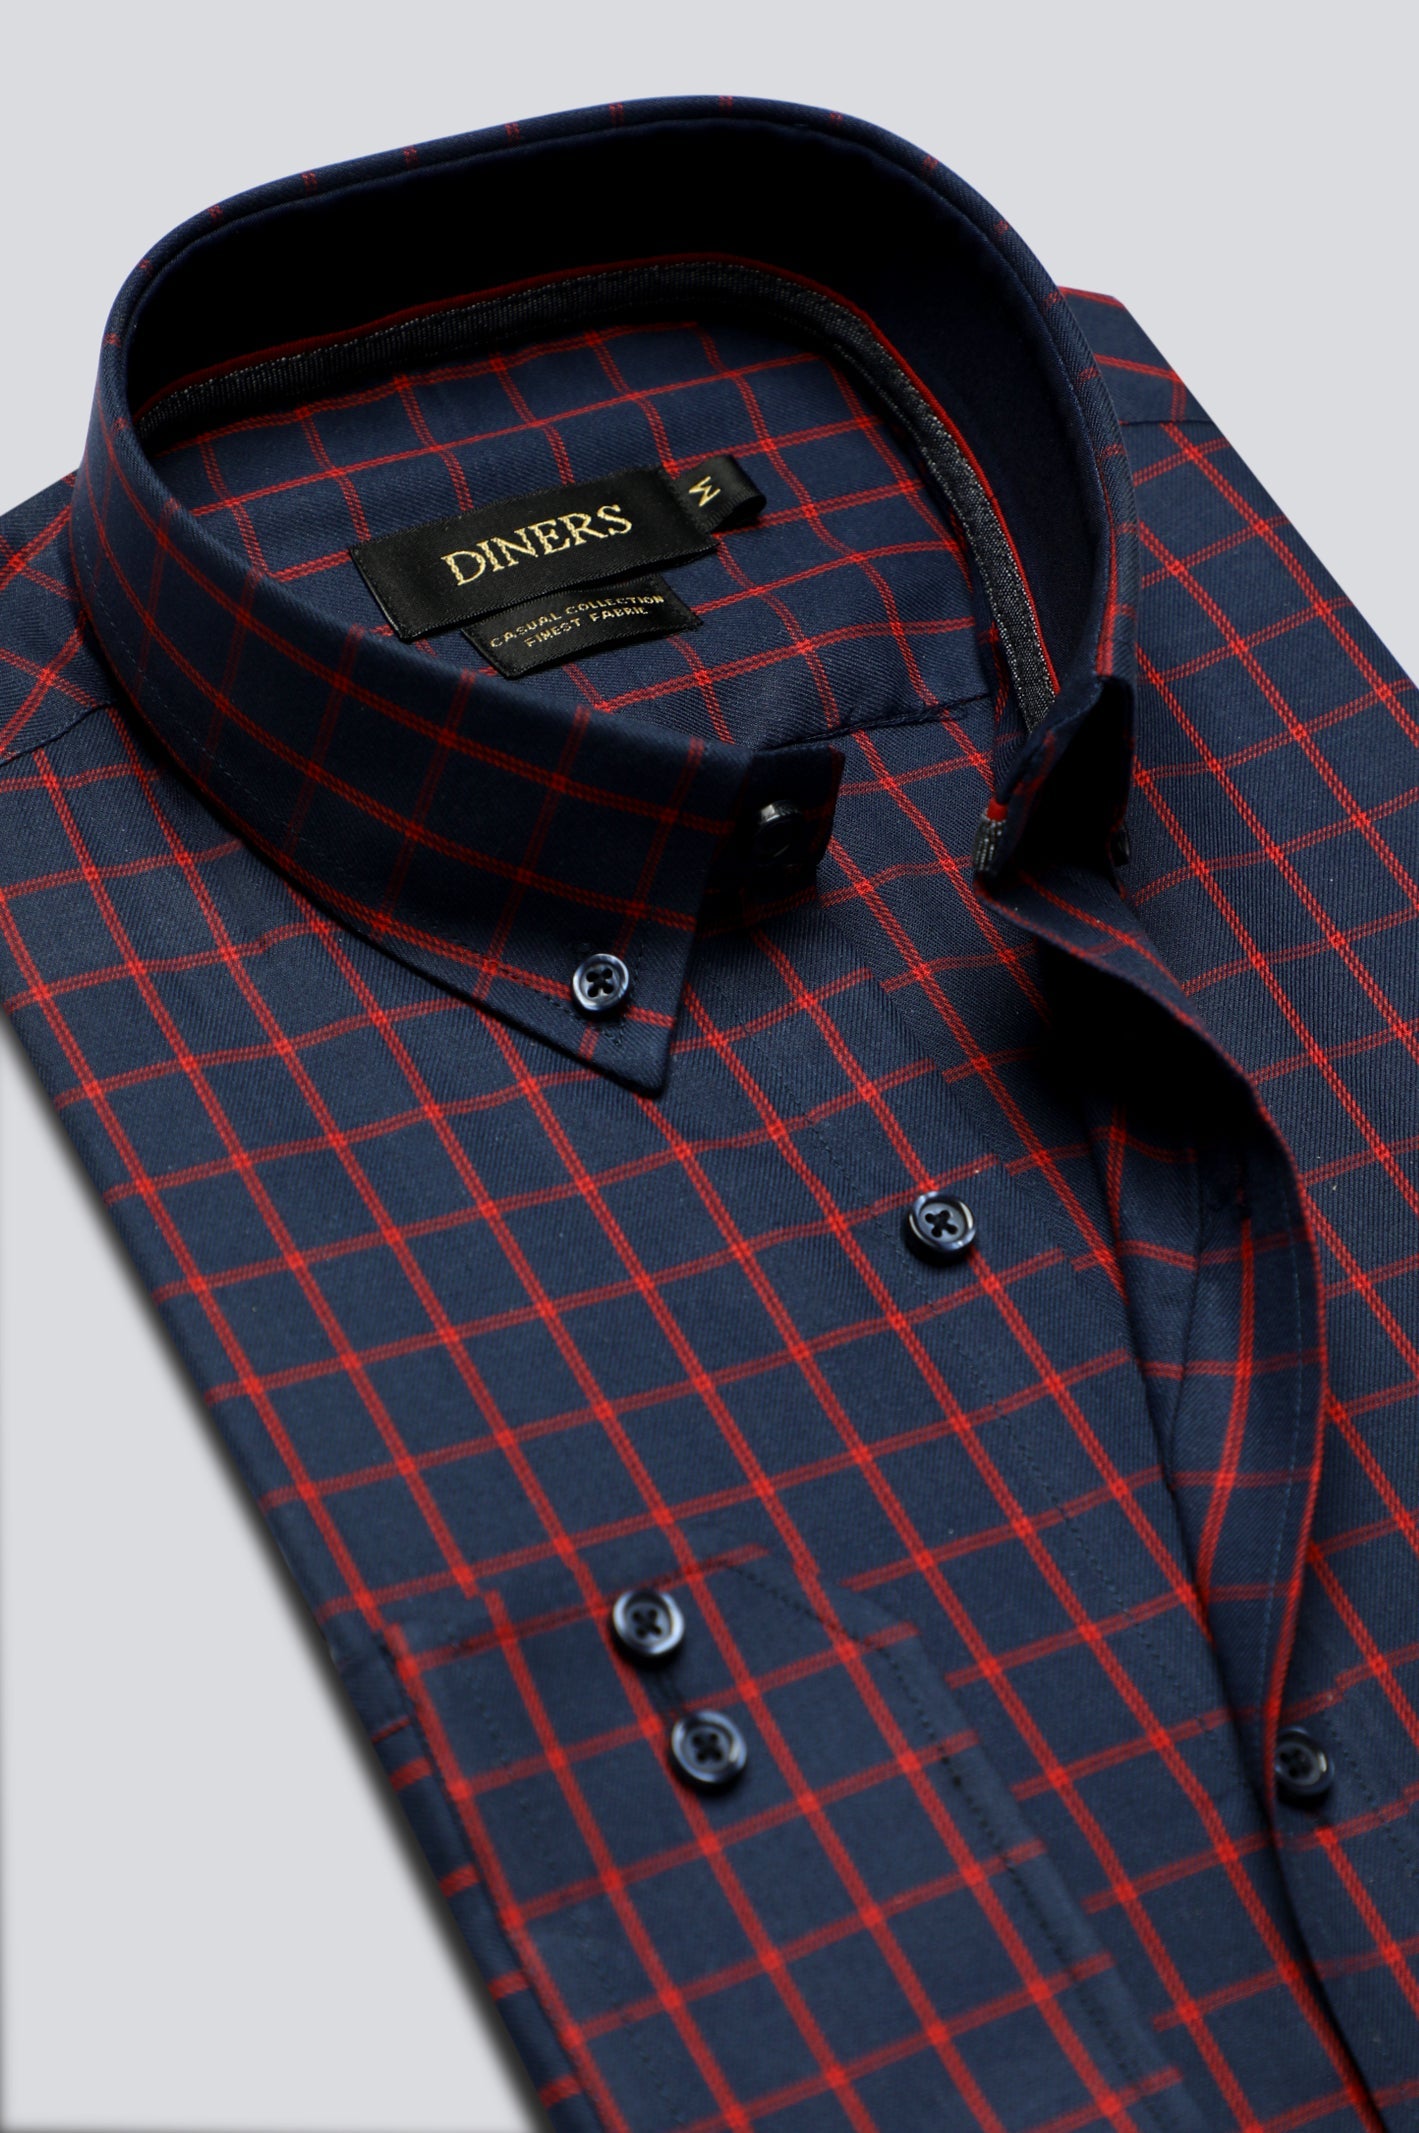 Navy Windowpane Check Casual Shirt for Men - Diners